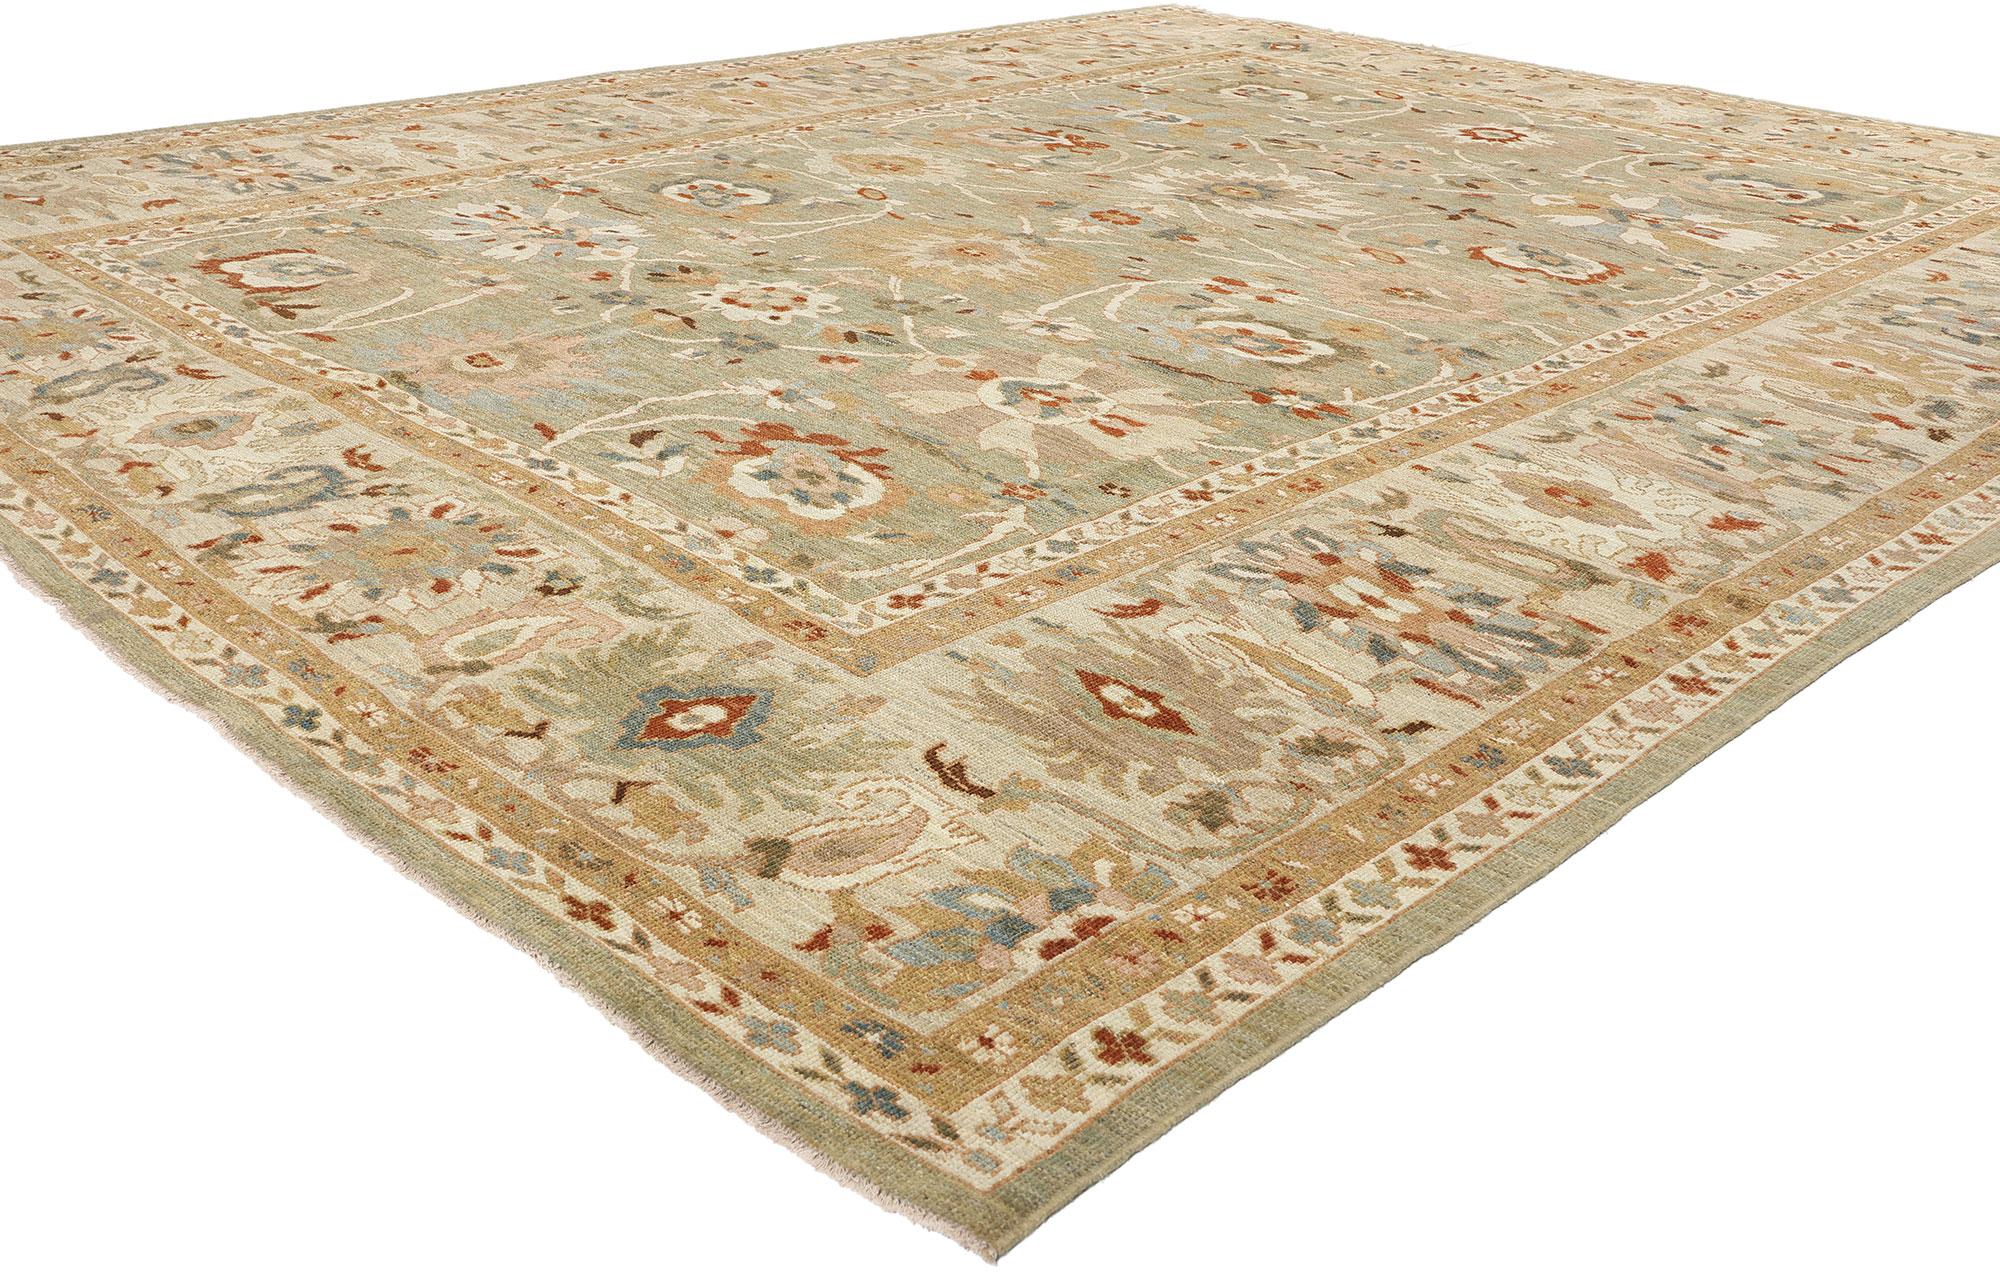 61280 Modern Persian Sultanabad Rug, 11'00 x 13'03. Hailing from Iran's Sultanabad region, Persian Sultanabad rugs are revered for their superb craftsmanship, enduring materials, and intricate designs. Handwoven with meticulous care, these rugs